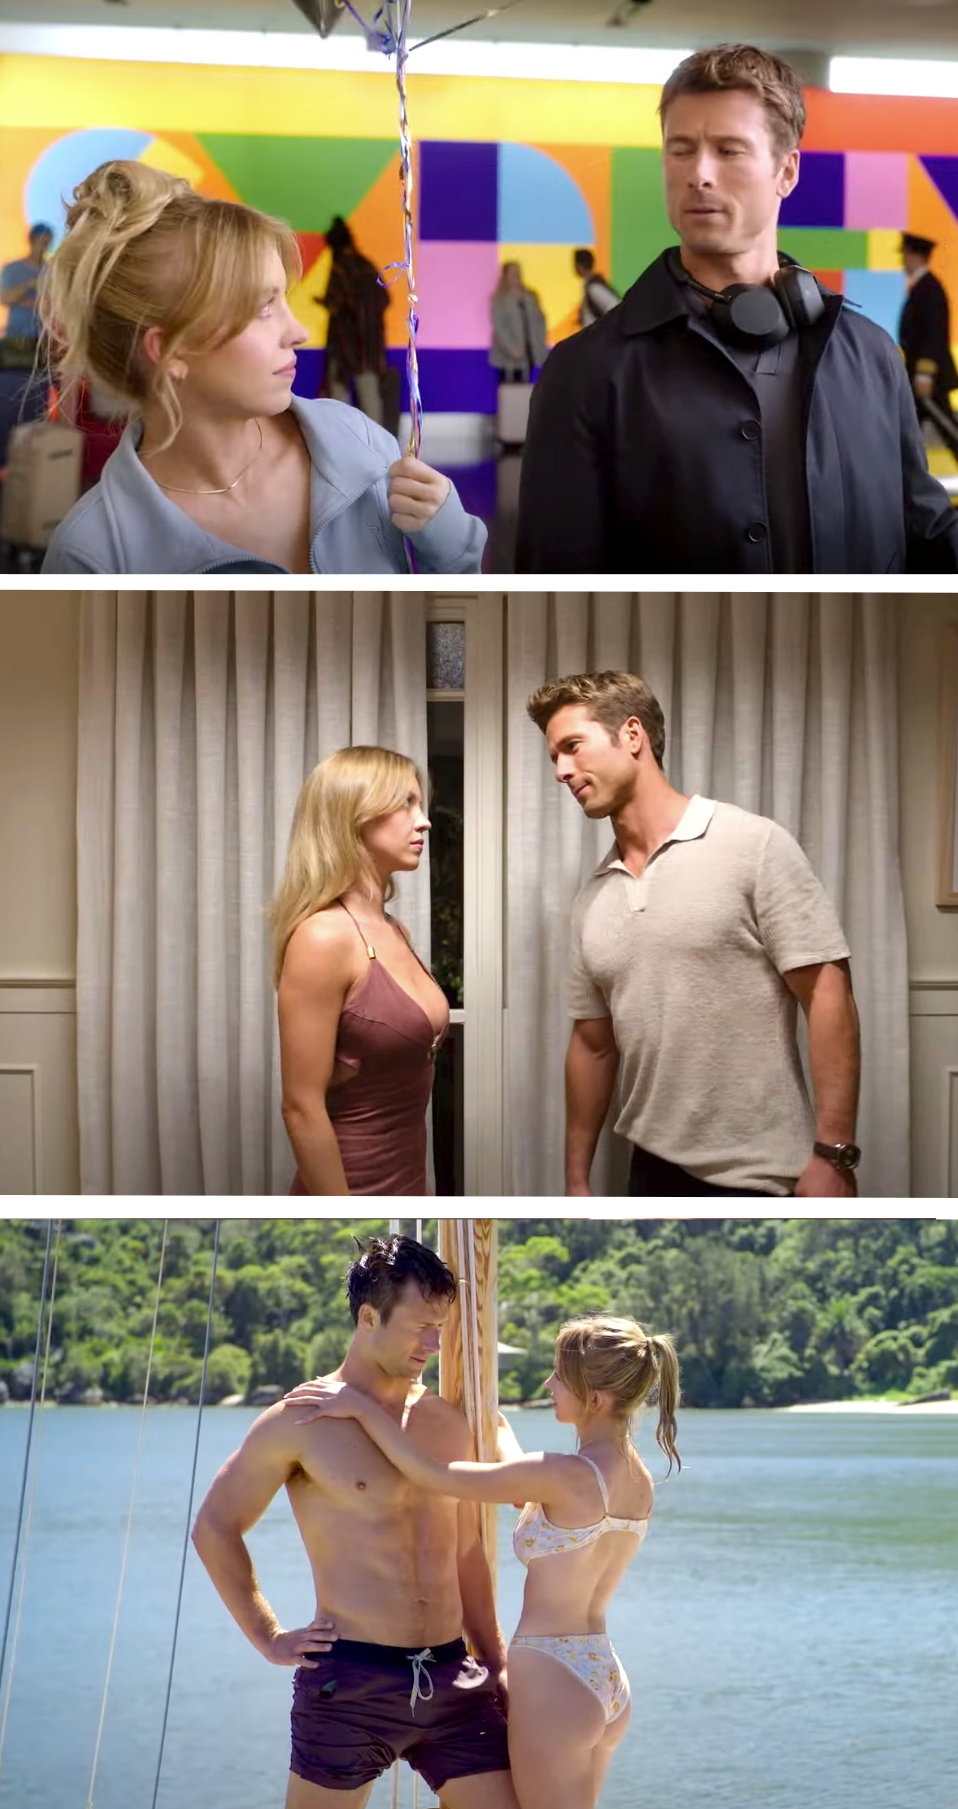 Sydney and Glen in scenes from the movie, including when they&#x27;re both wearing bathing suits